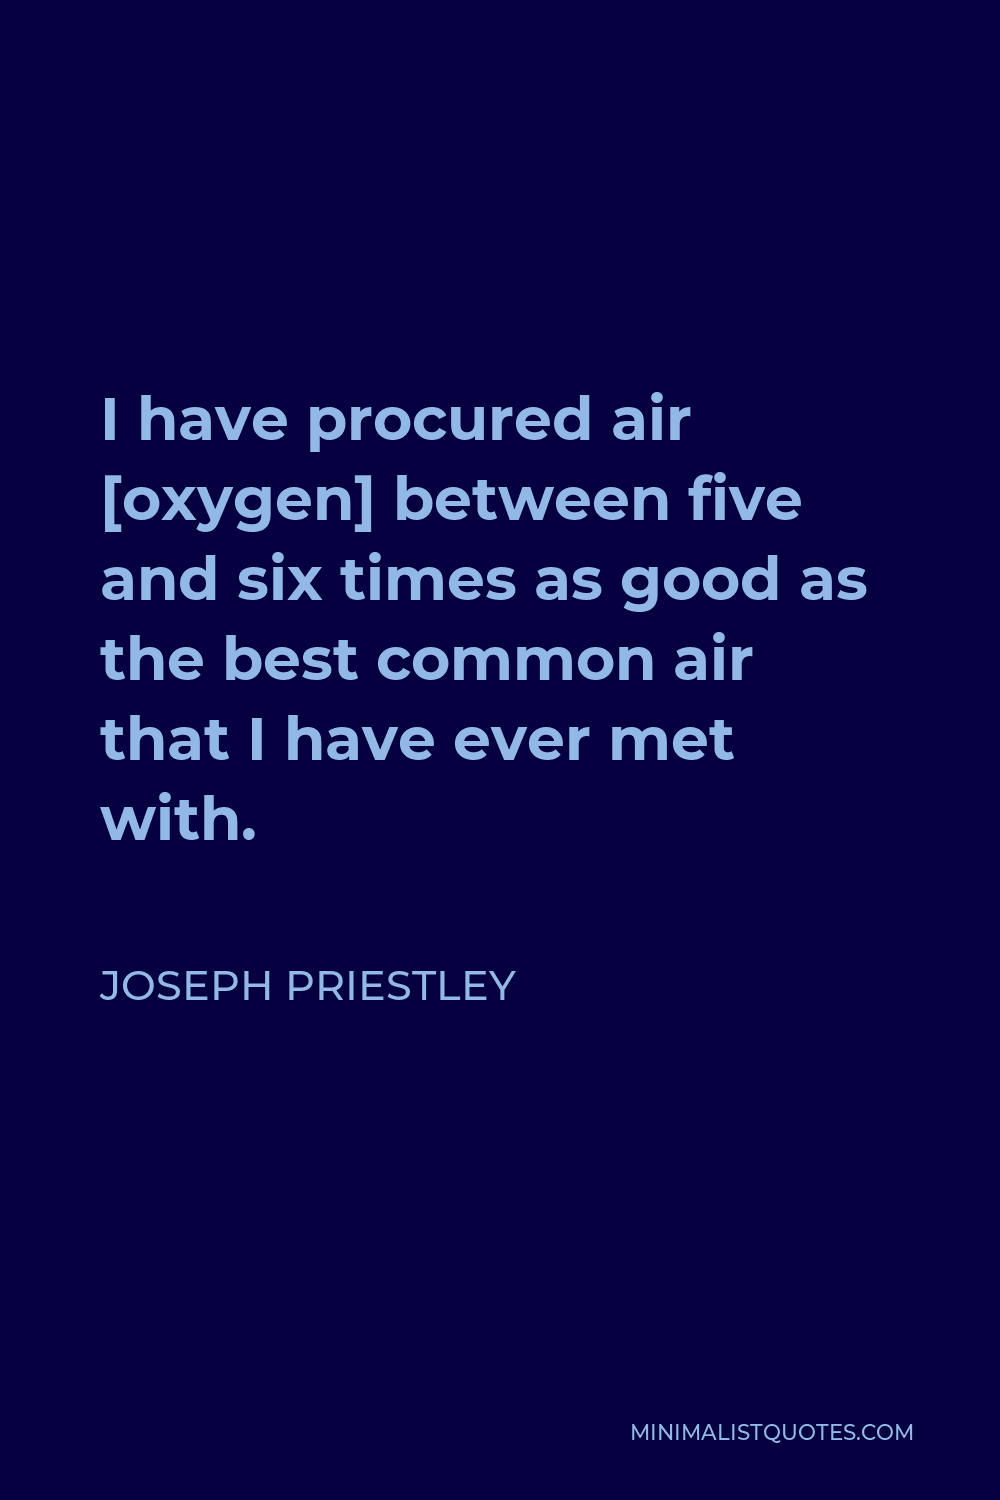 Joseph Priestley Quote - I have procured air [oxygen] between five and six times as good as the best common air that I have ever met with.